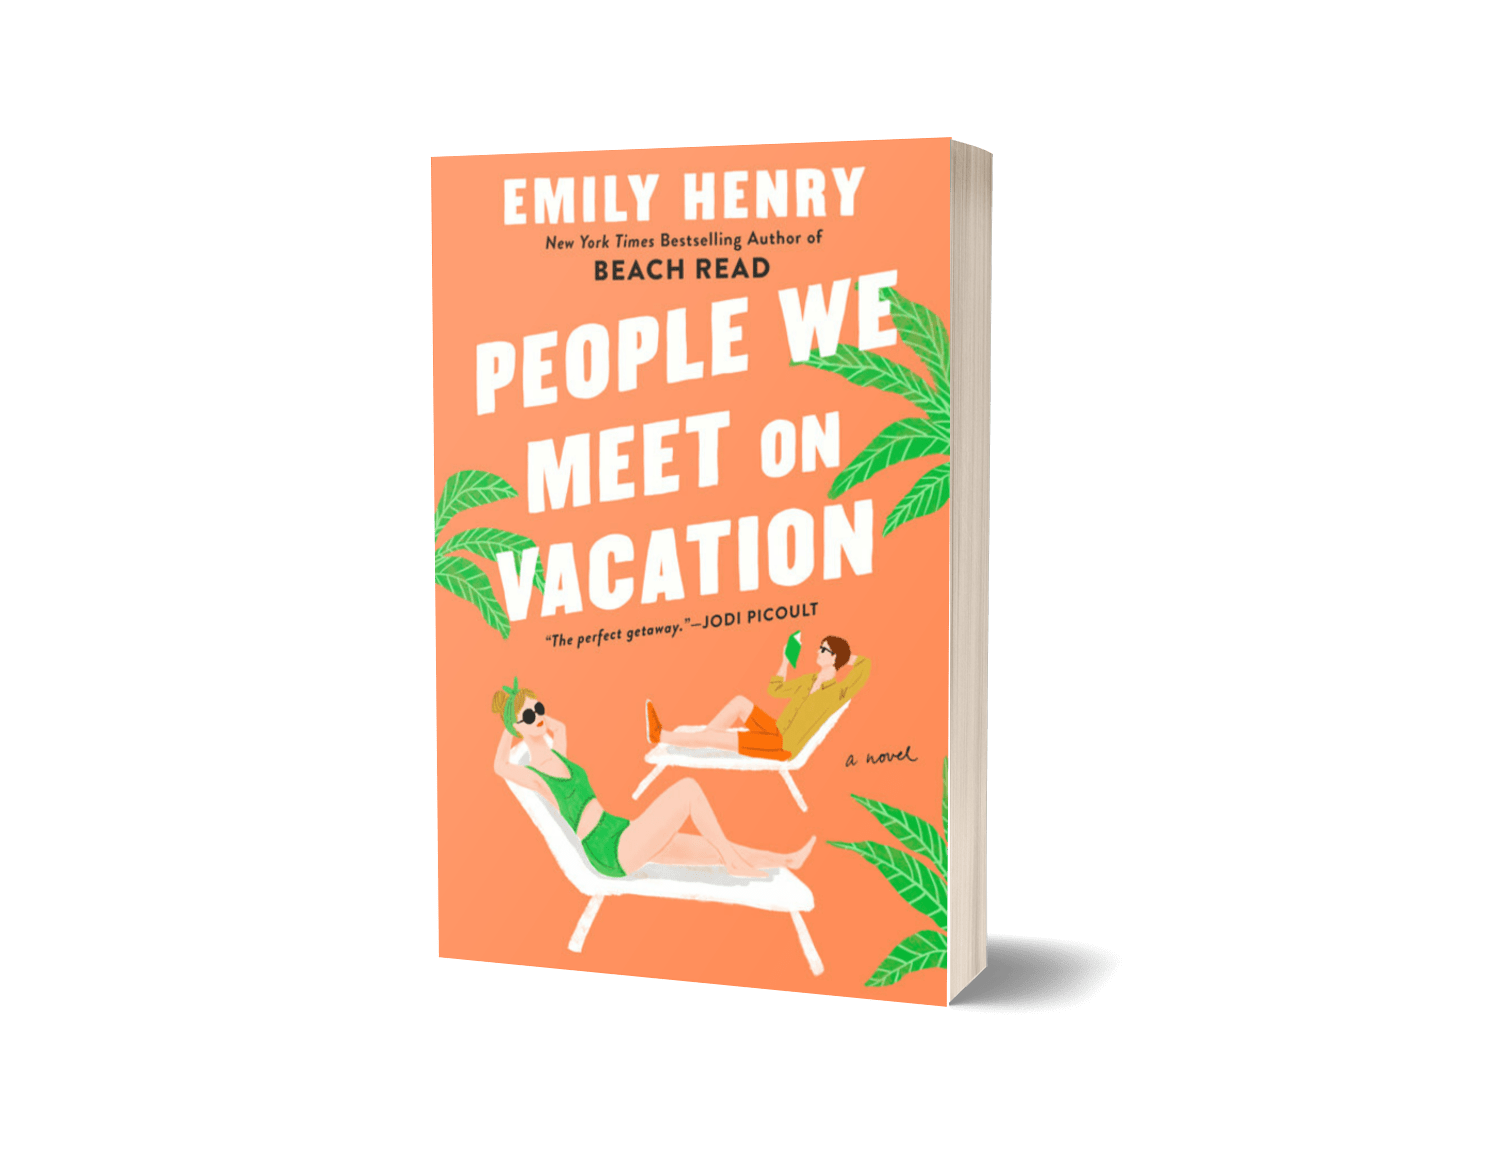 People We meet on Vacations by Emily Henry